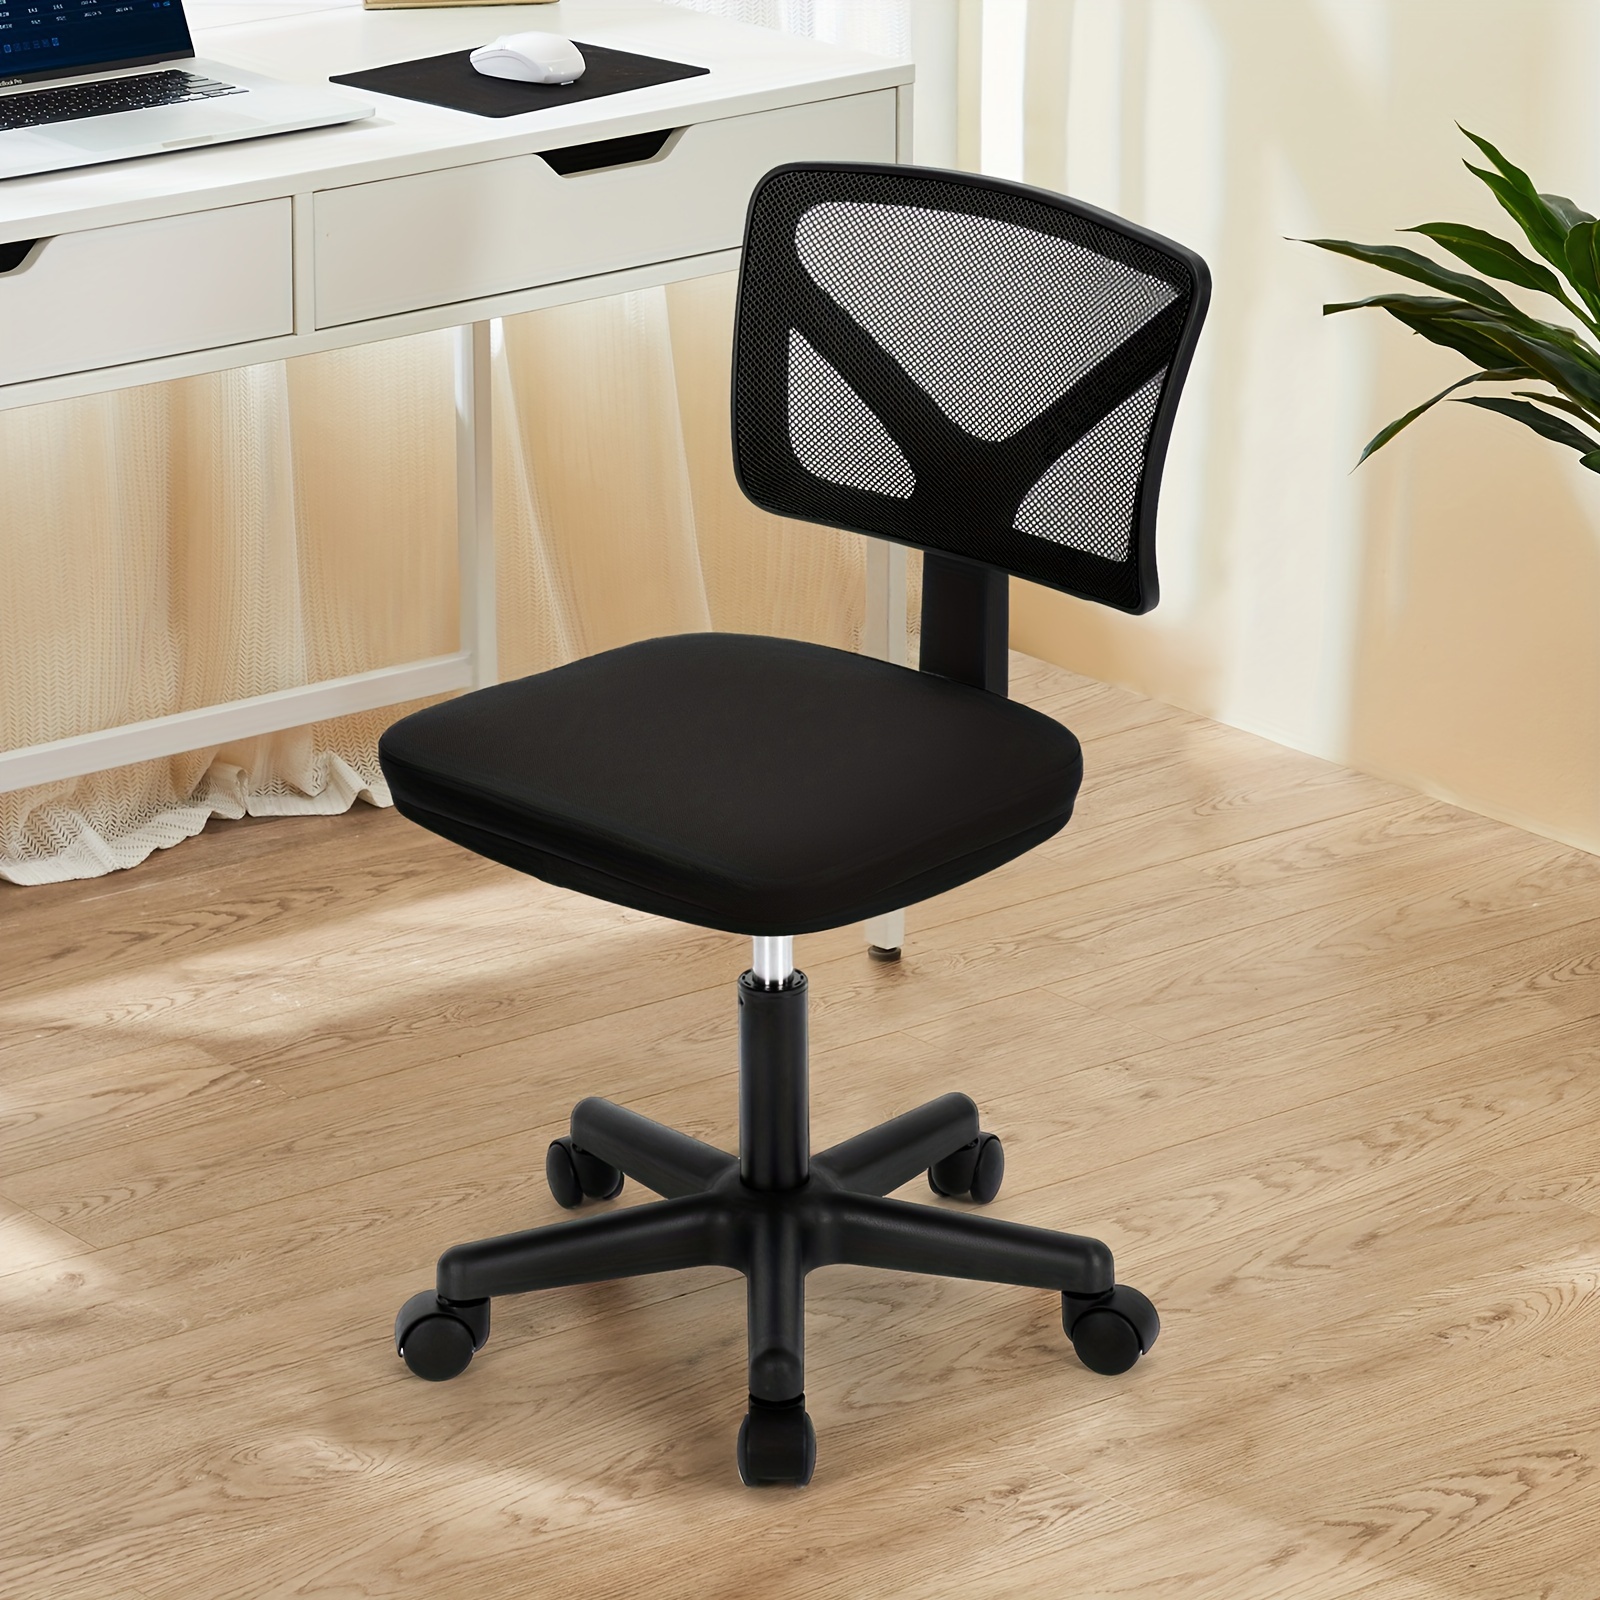 

Olixis Armless Desk Chairs, Ergonomic Low Back Computer Chair No Arms, Adjustable Rolling Mesh Task Work With Wheels Work Vanity Chair For Small Spaces Home Bedroom Study